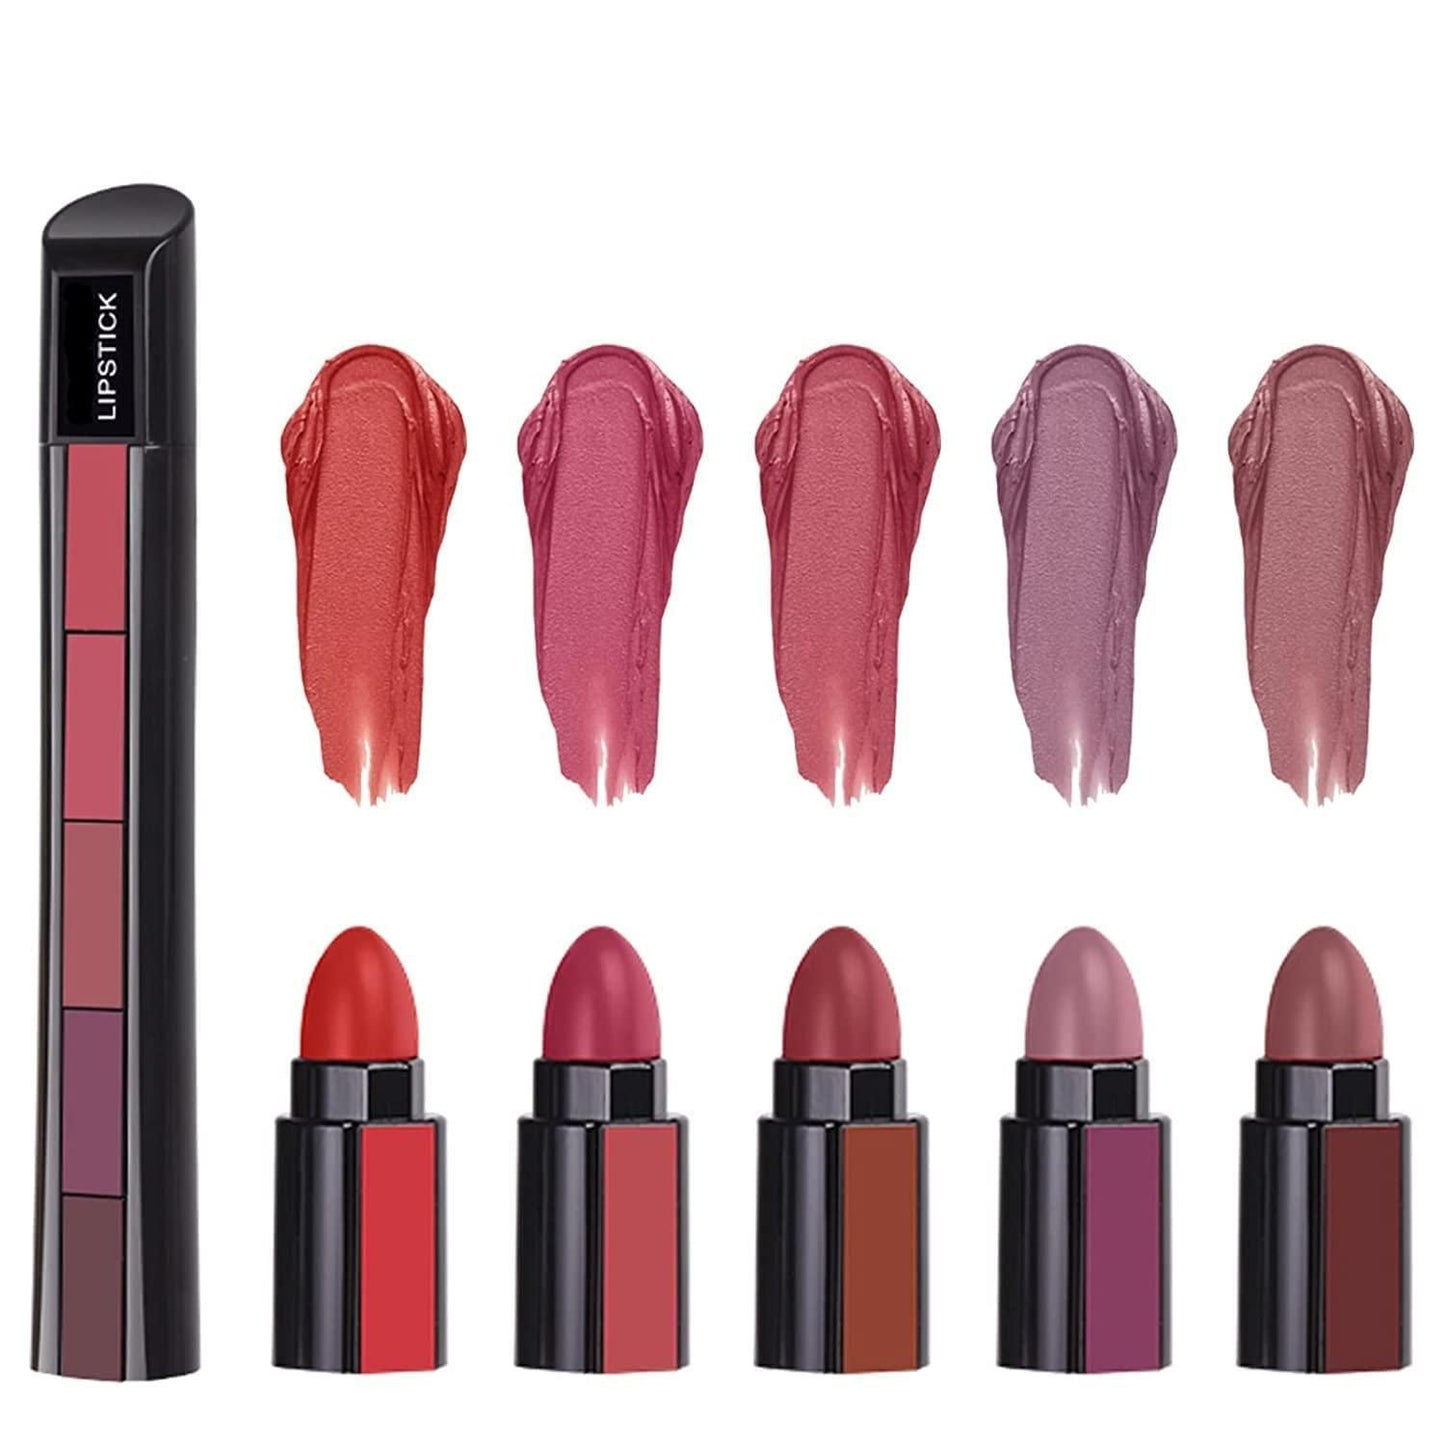 5 in 1 Lipsticks Combo Set, Red & Nude Edition